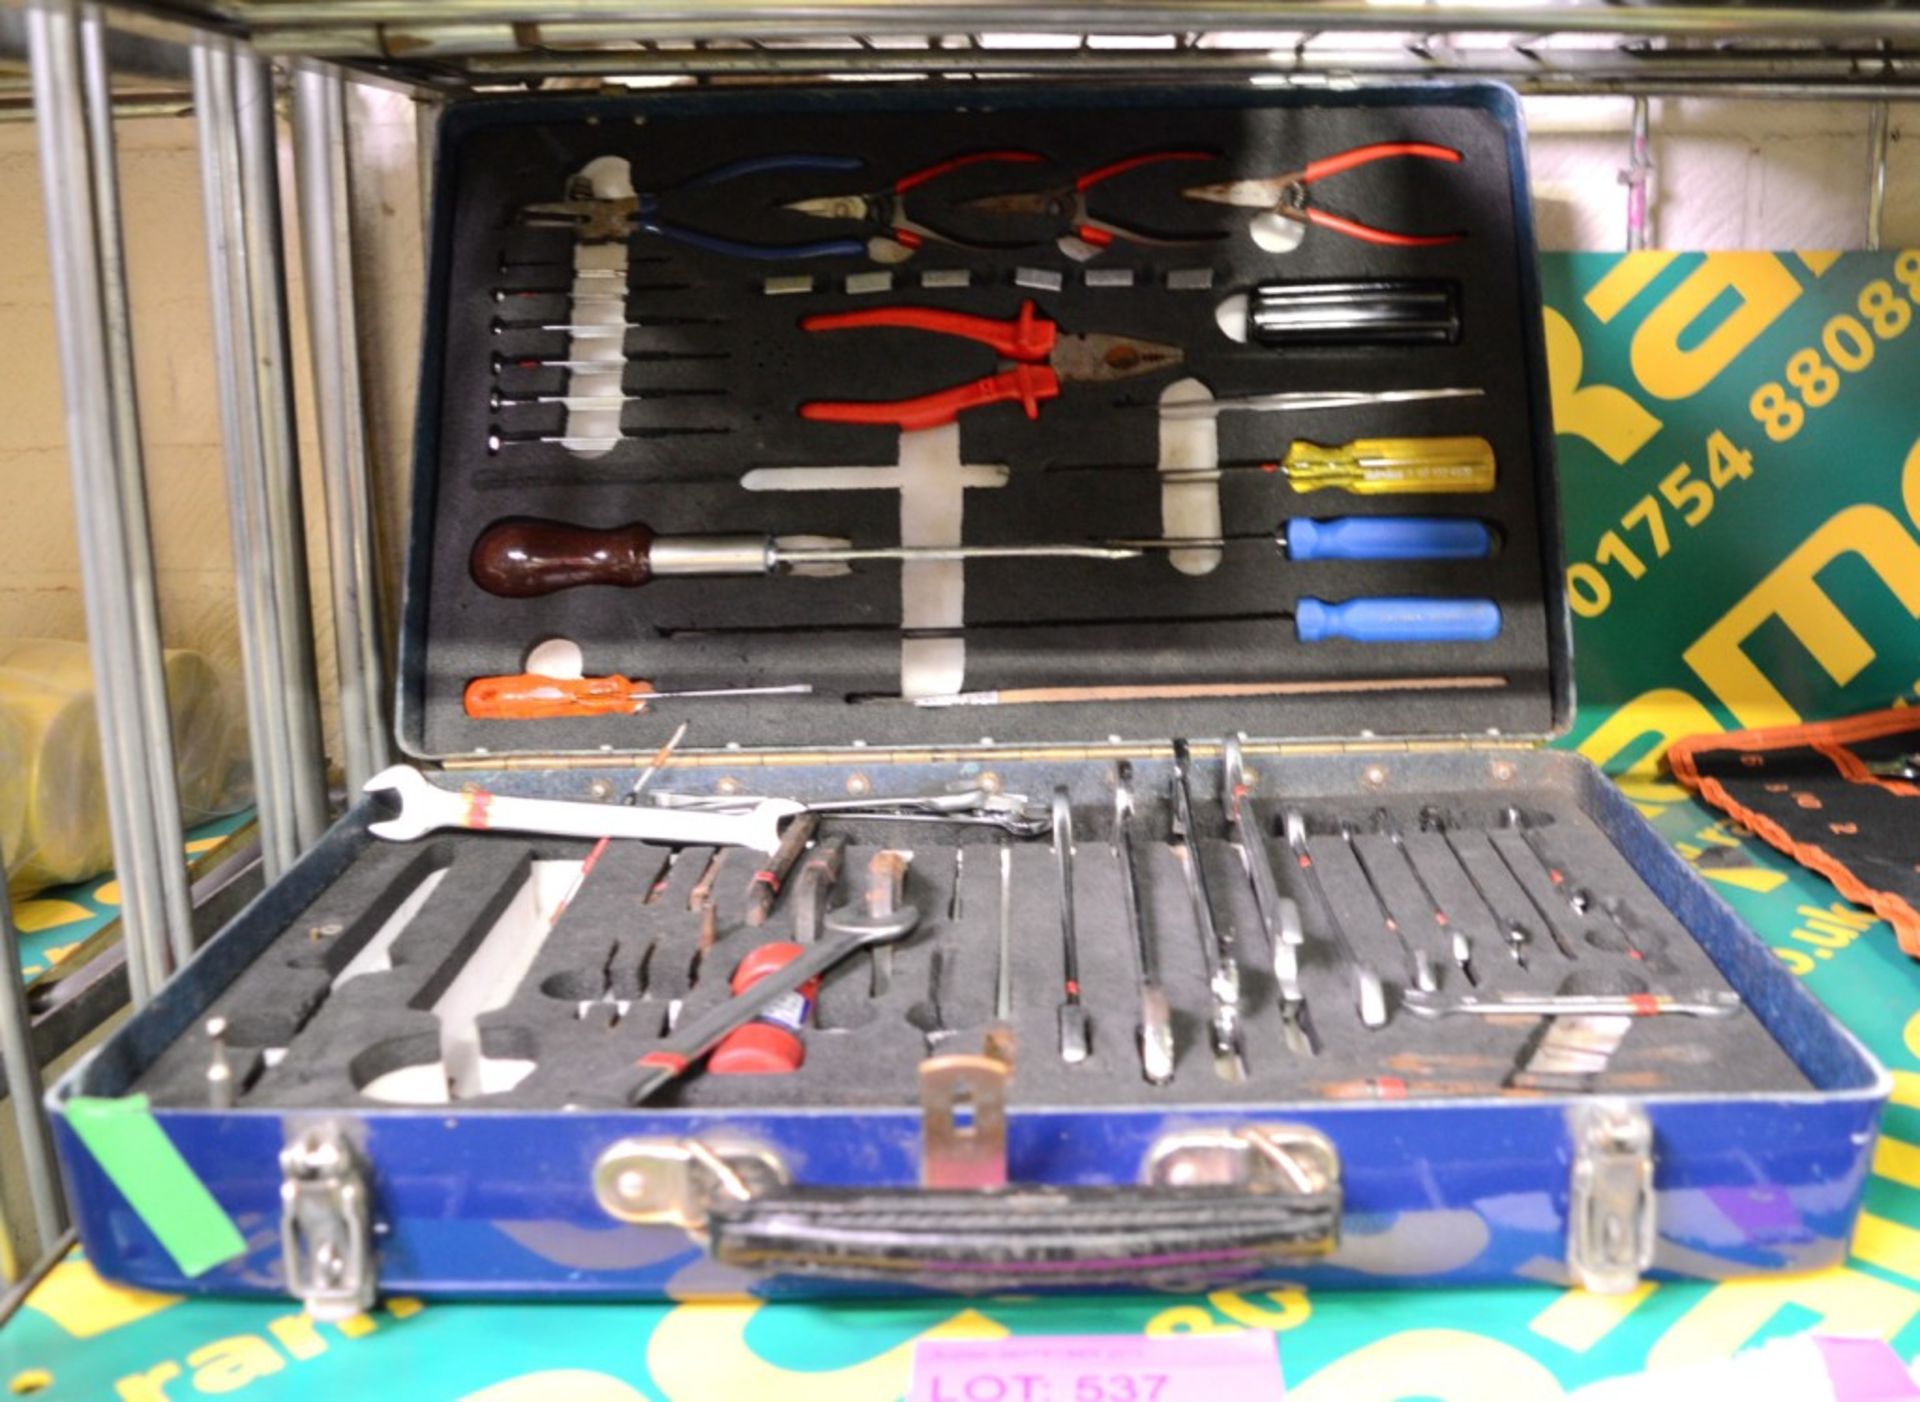 Tool Kit in GRP Carry Case.